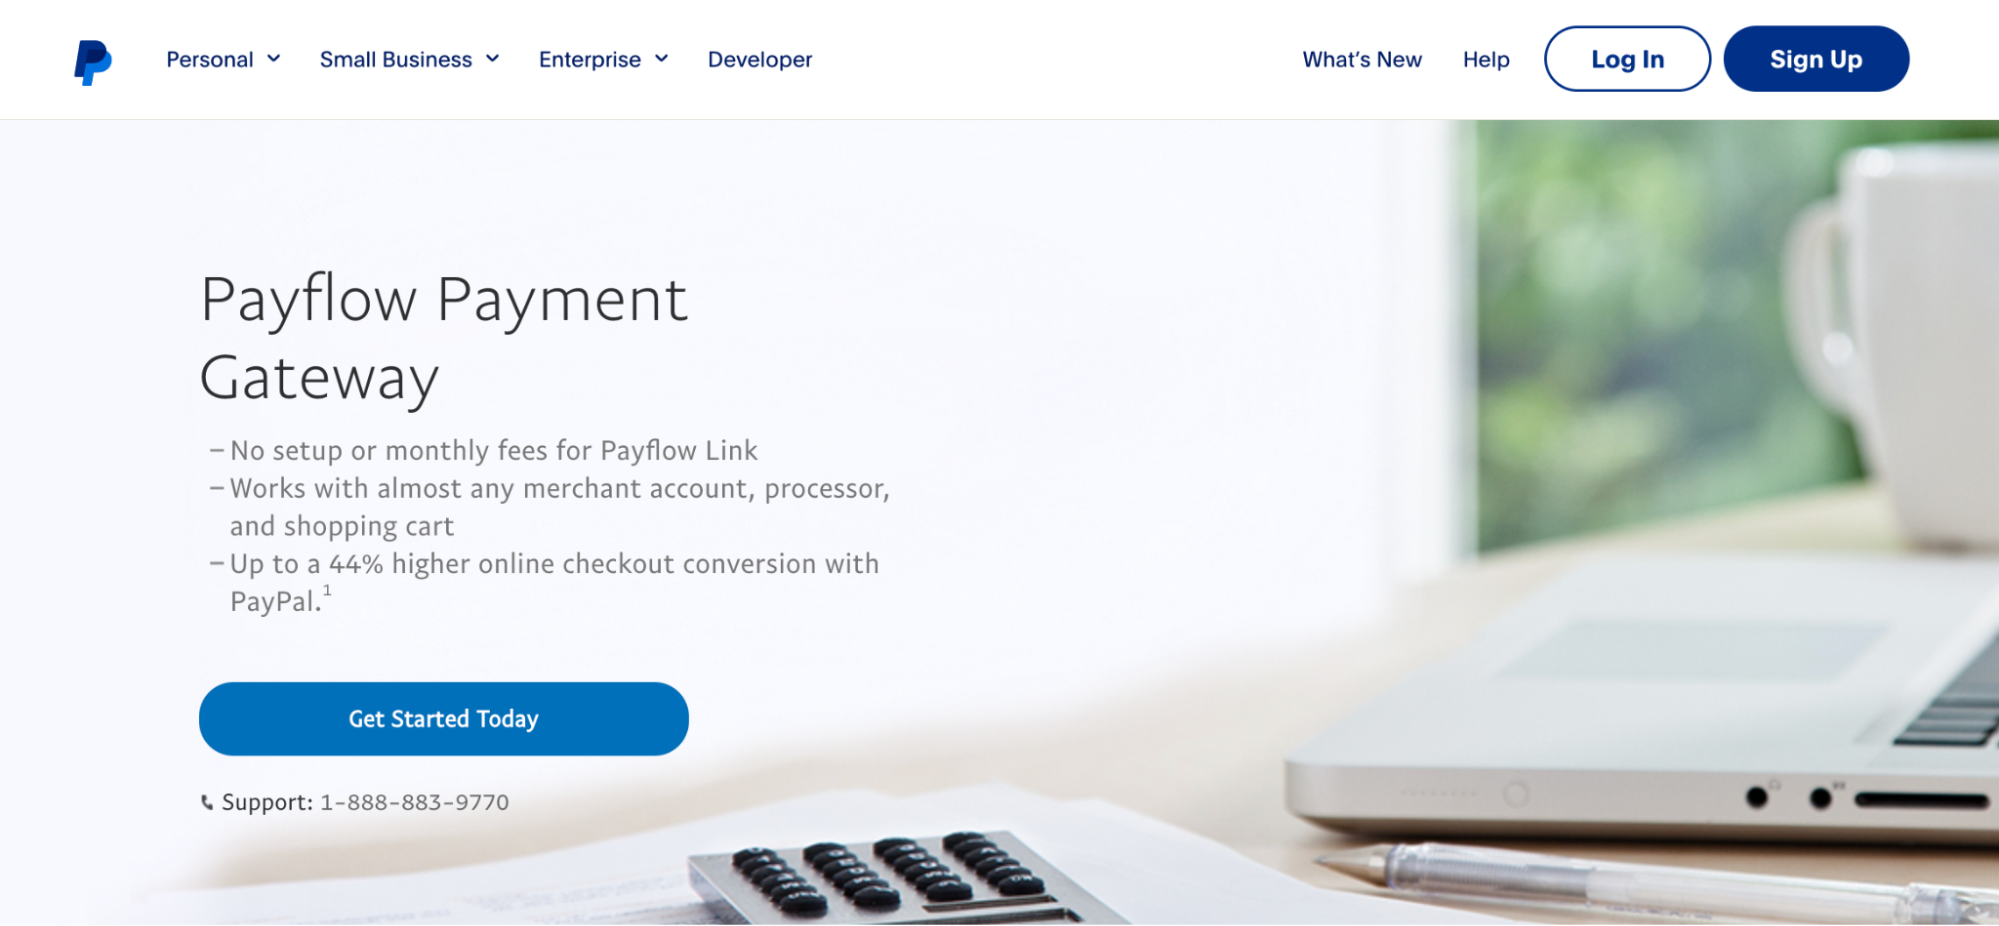 Landing page for PayPal’s Payflow gateway.